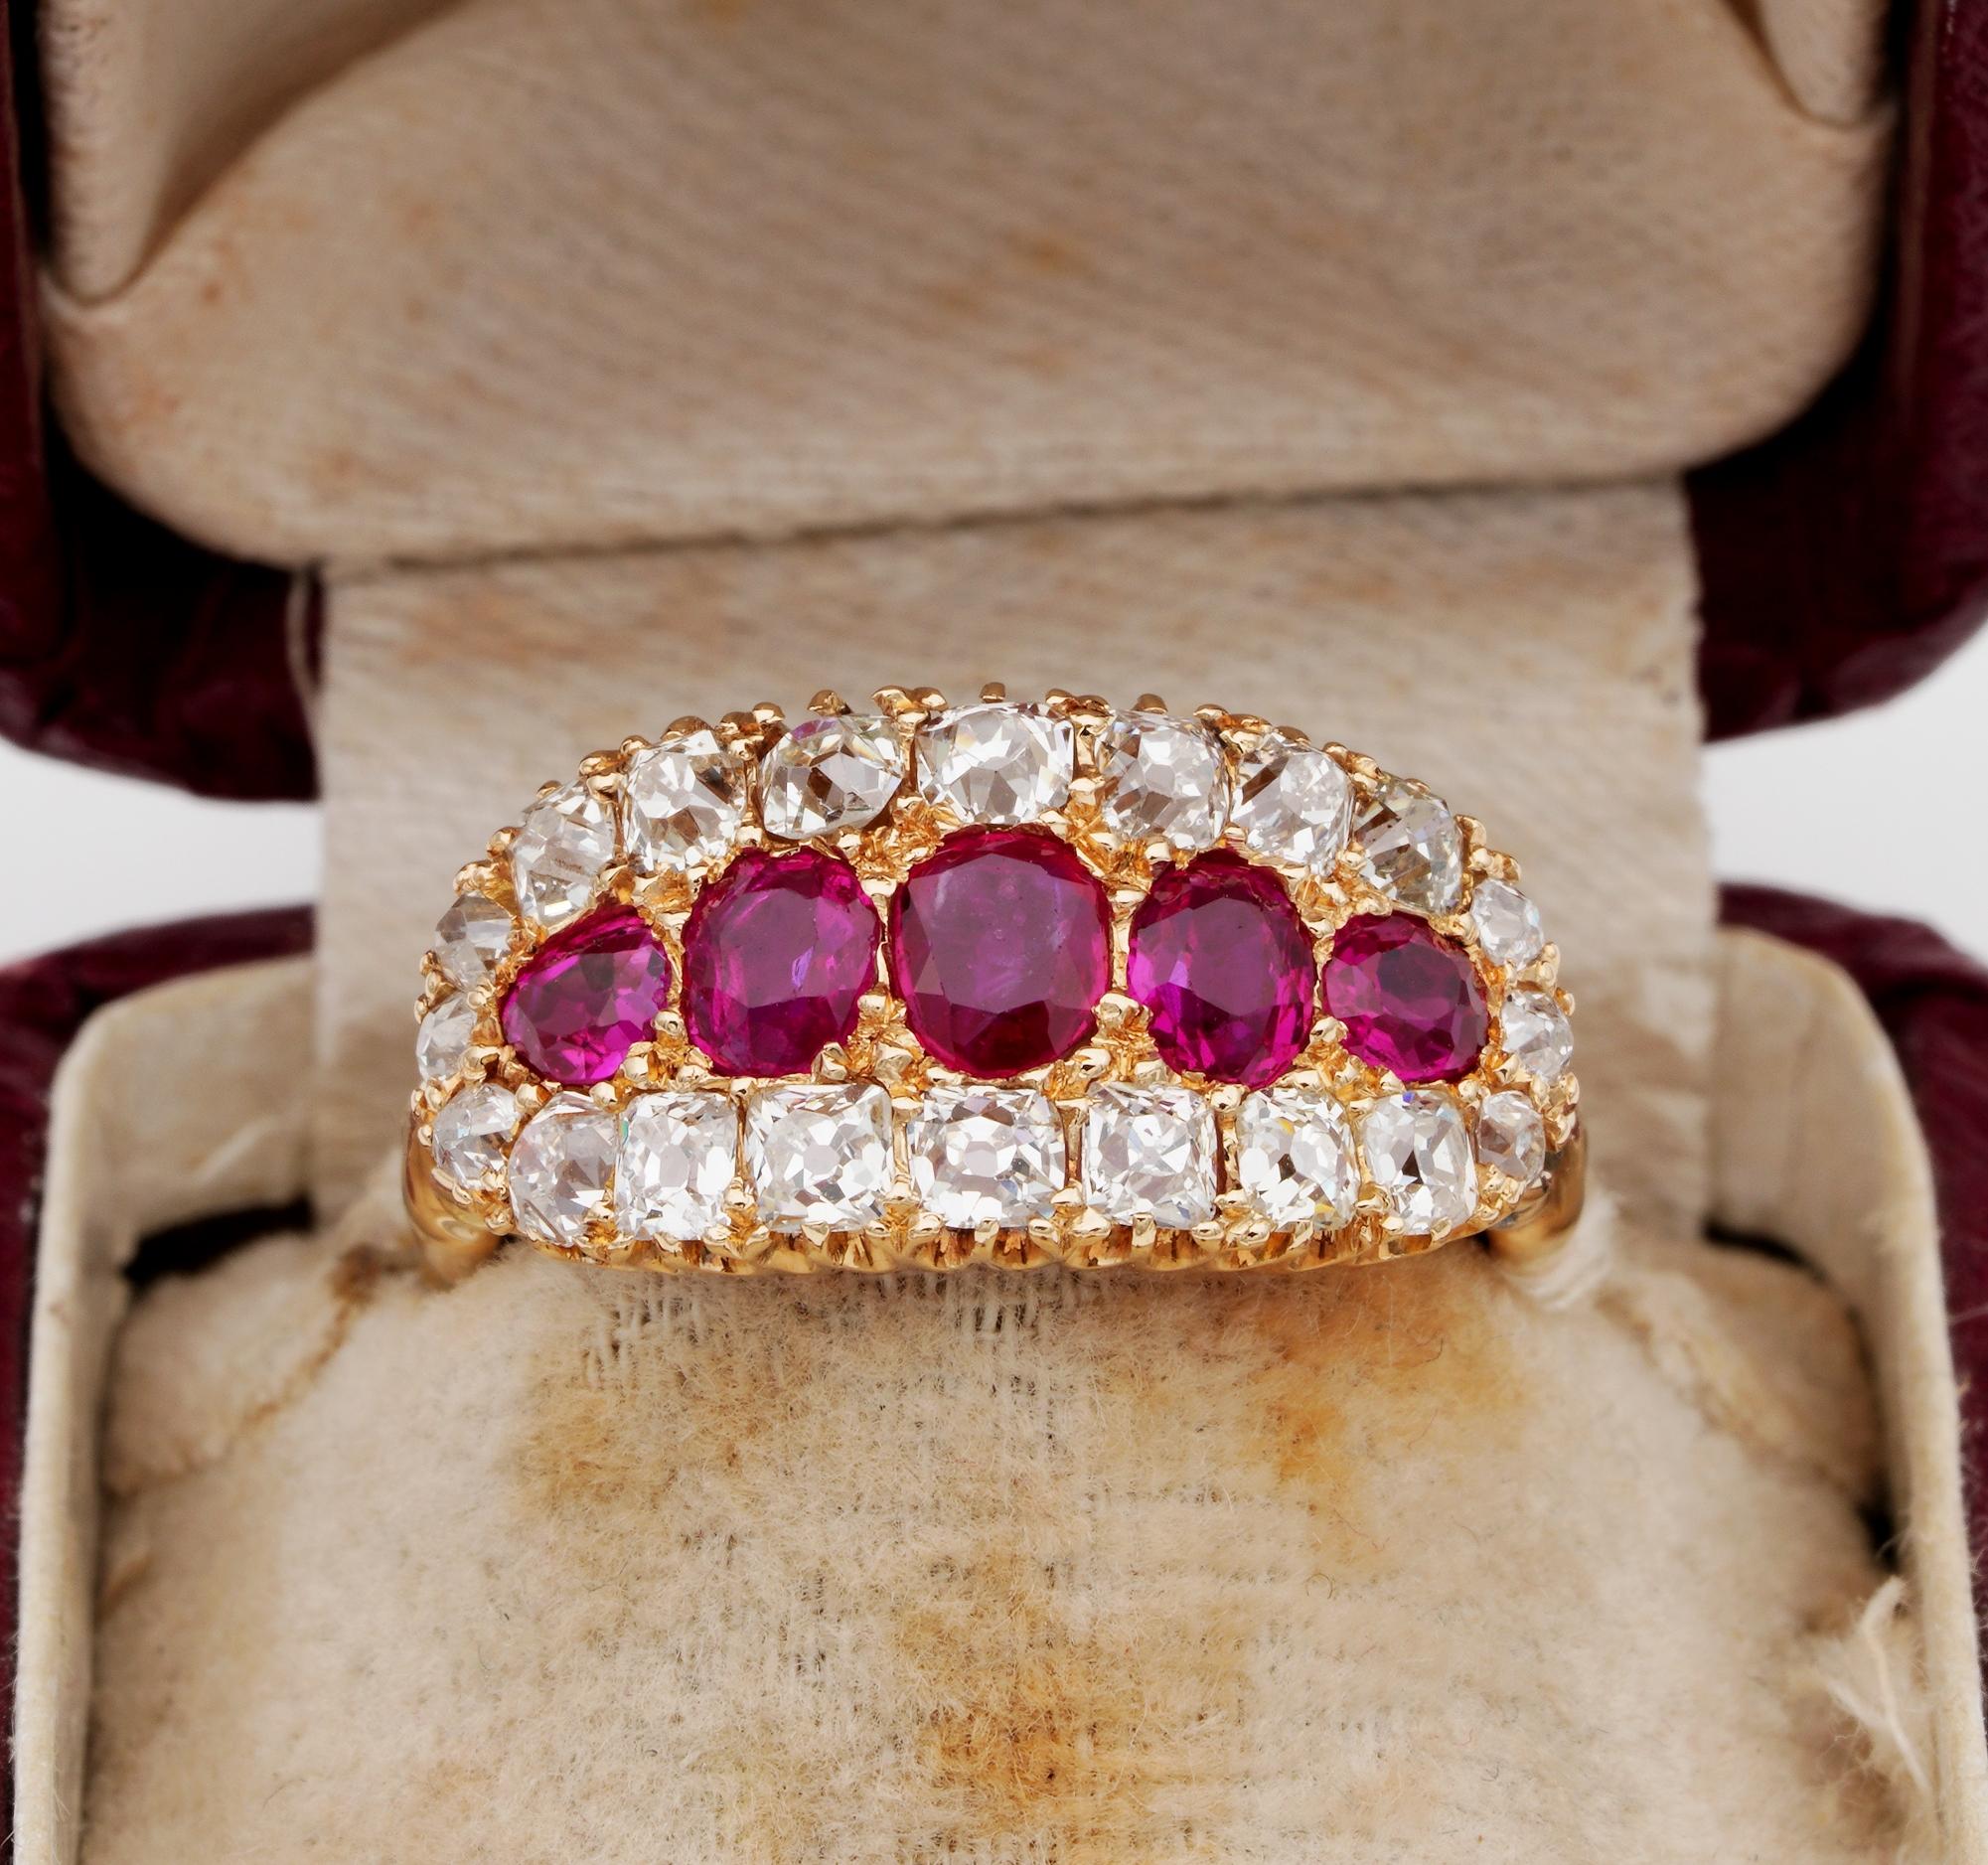 Exceptional Victorian of the highest standards, rare Natural Burmese Rubies and Diamond five stone ring
Could be an outstanding engagement ring
Crafted of solid 18 KT rose gold – not marked -during 1880
Lively, intense, fiery Pigeon Blood Red Ruby